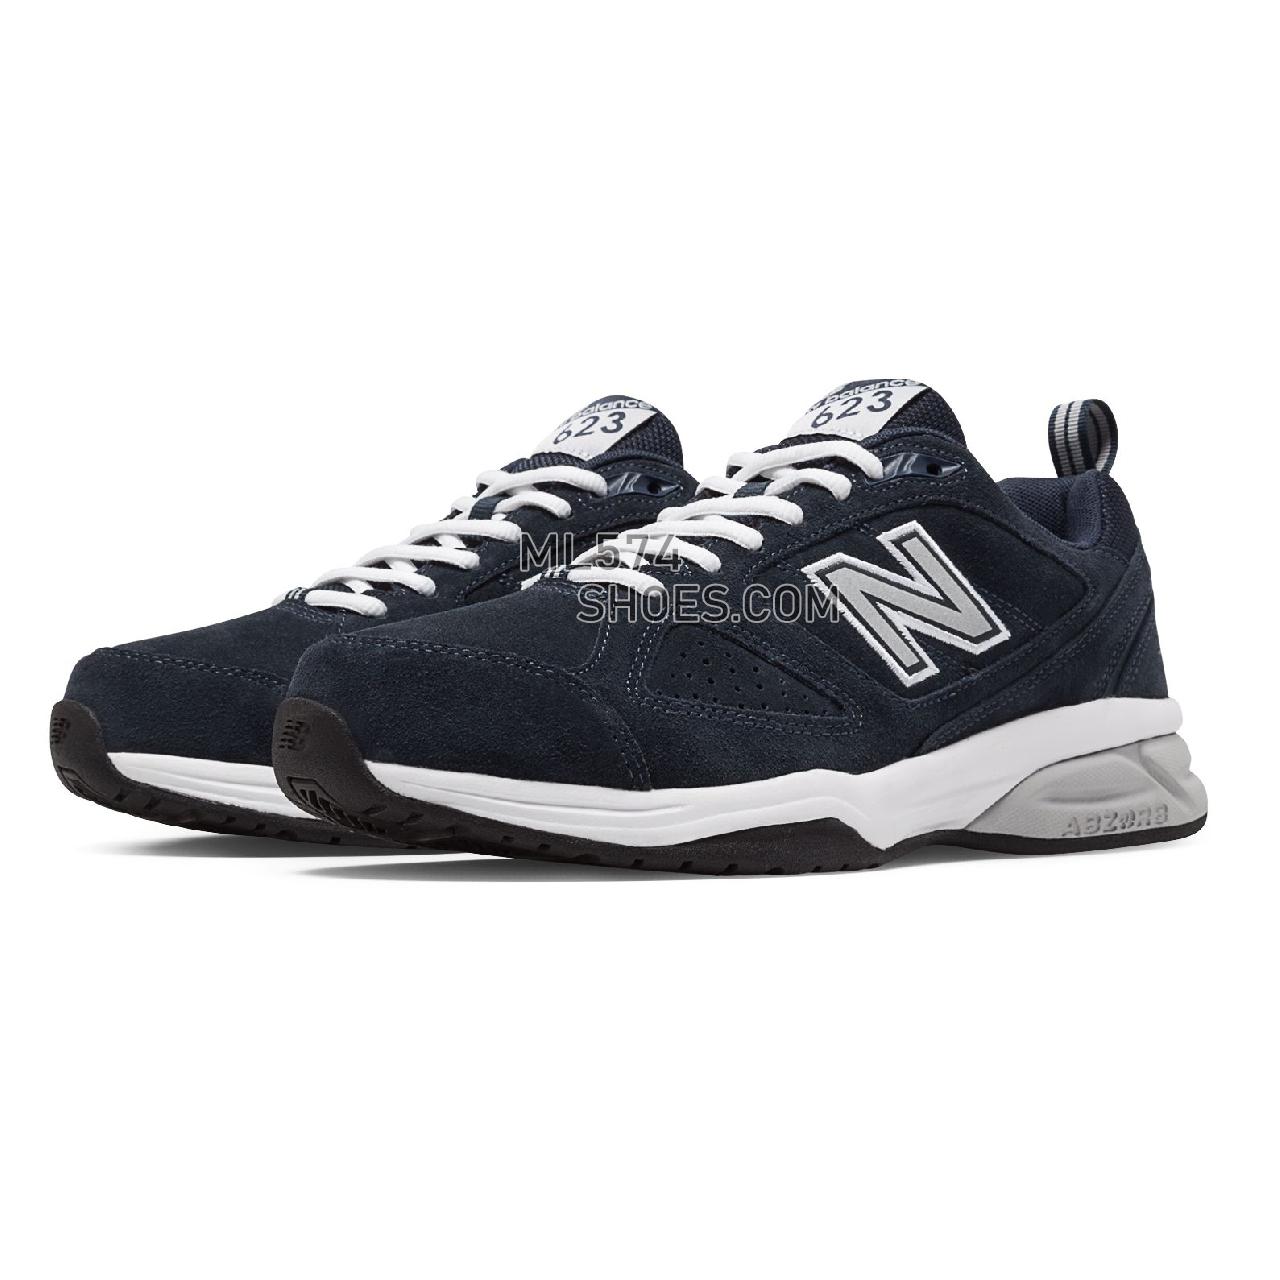 New Balance New Balance 623v3 Suede Trainer - Men's 623 - X-training Navy with Off White - MX623NS3